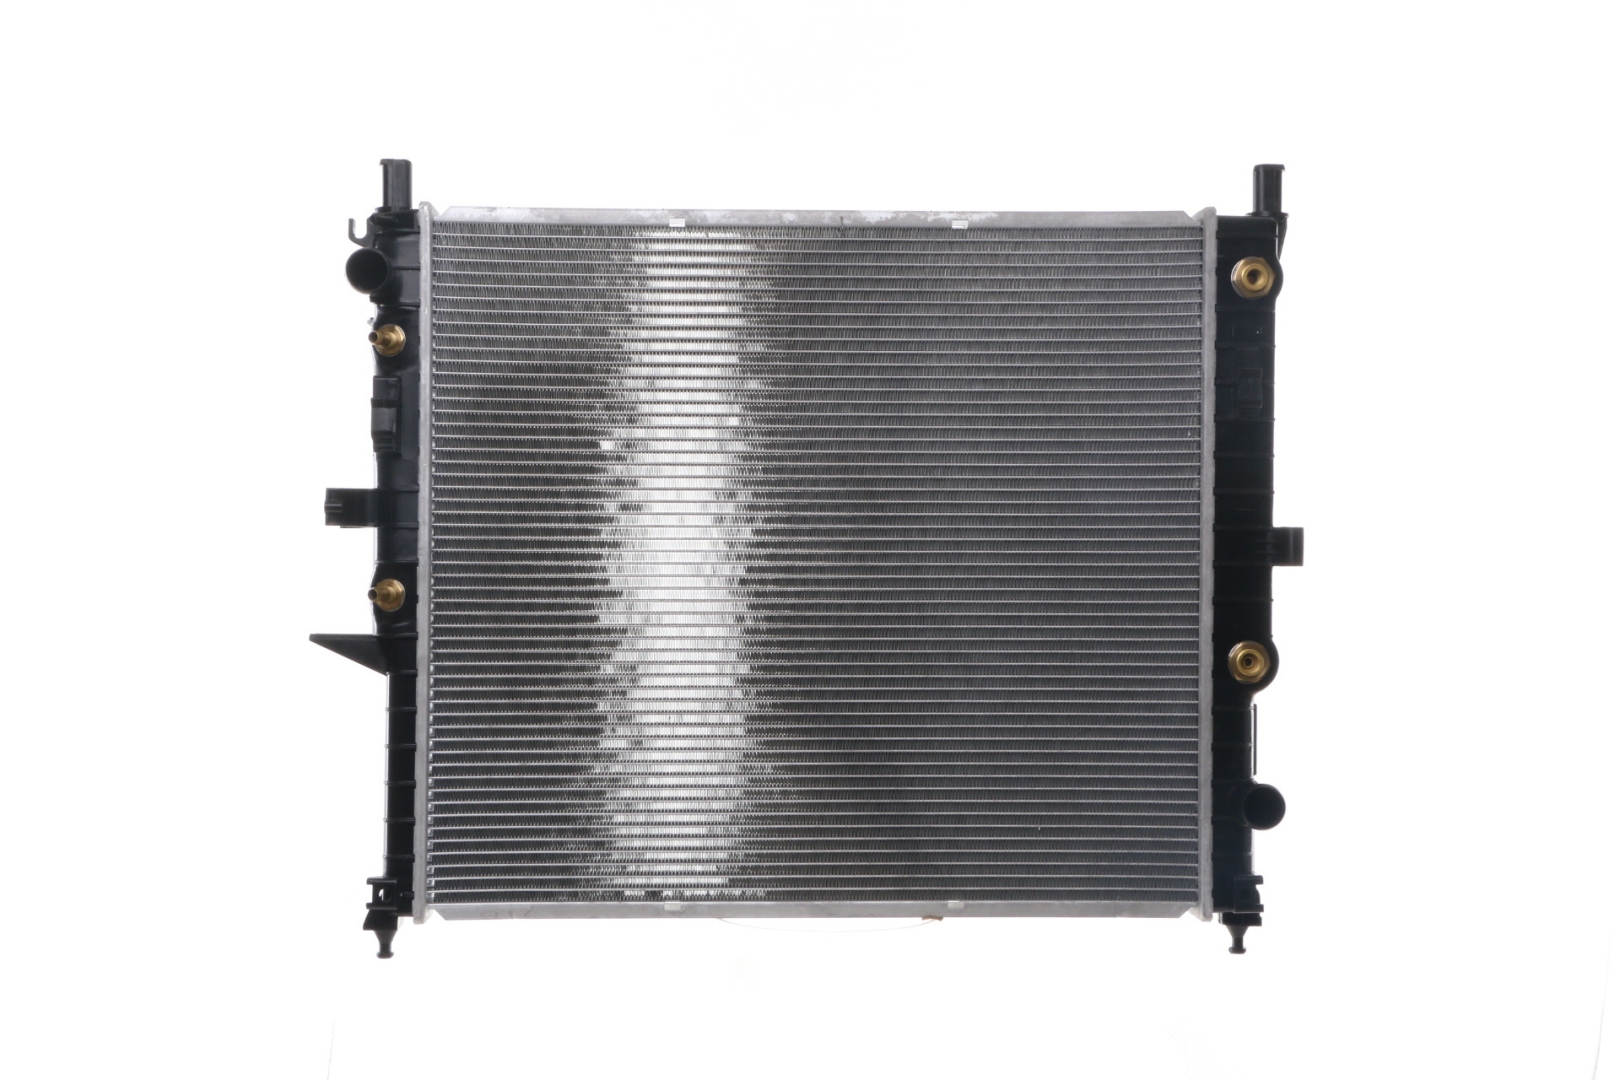 MAHLE ORIGINAL CR 553 000S Engine radiator for vehicles with/without air conditioning, 609 x 555 x 40 mm, Automatic Transmission, Manual Transmission, Brazed cooling fins